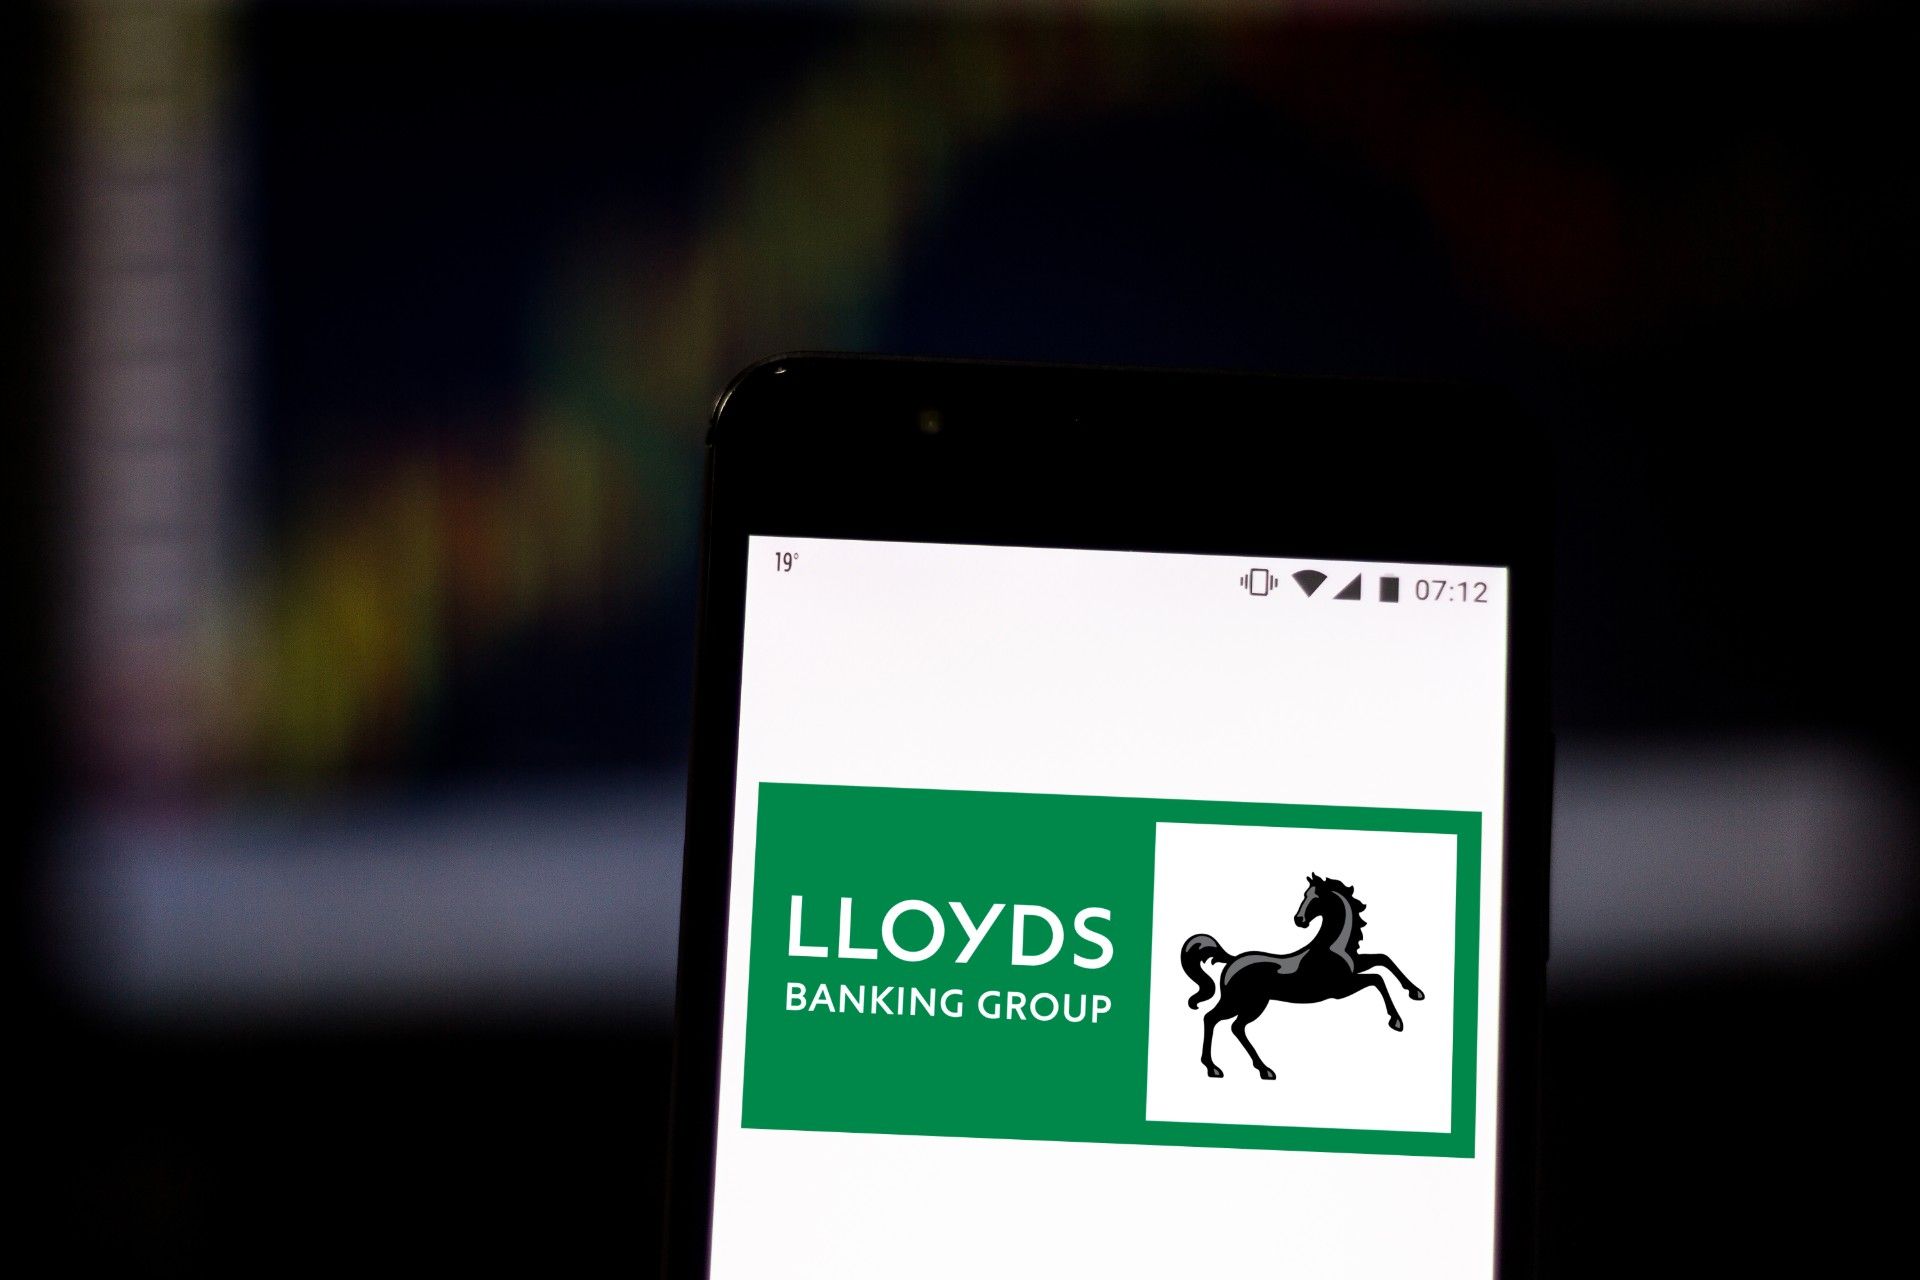 Lloyds Bank app on smartphone - Lloyds app to offer subscription cancellation